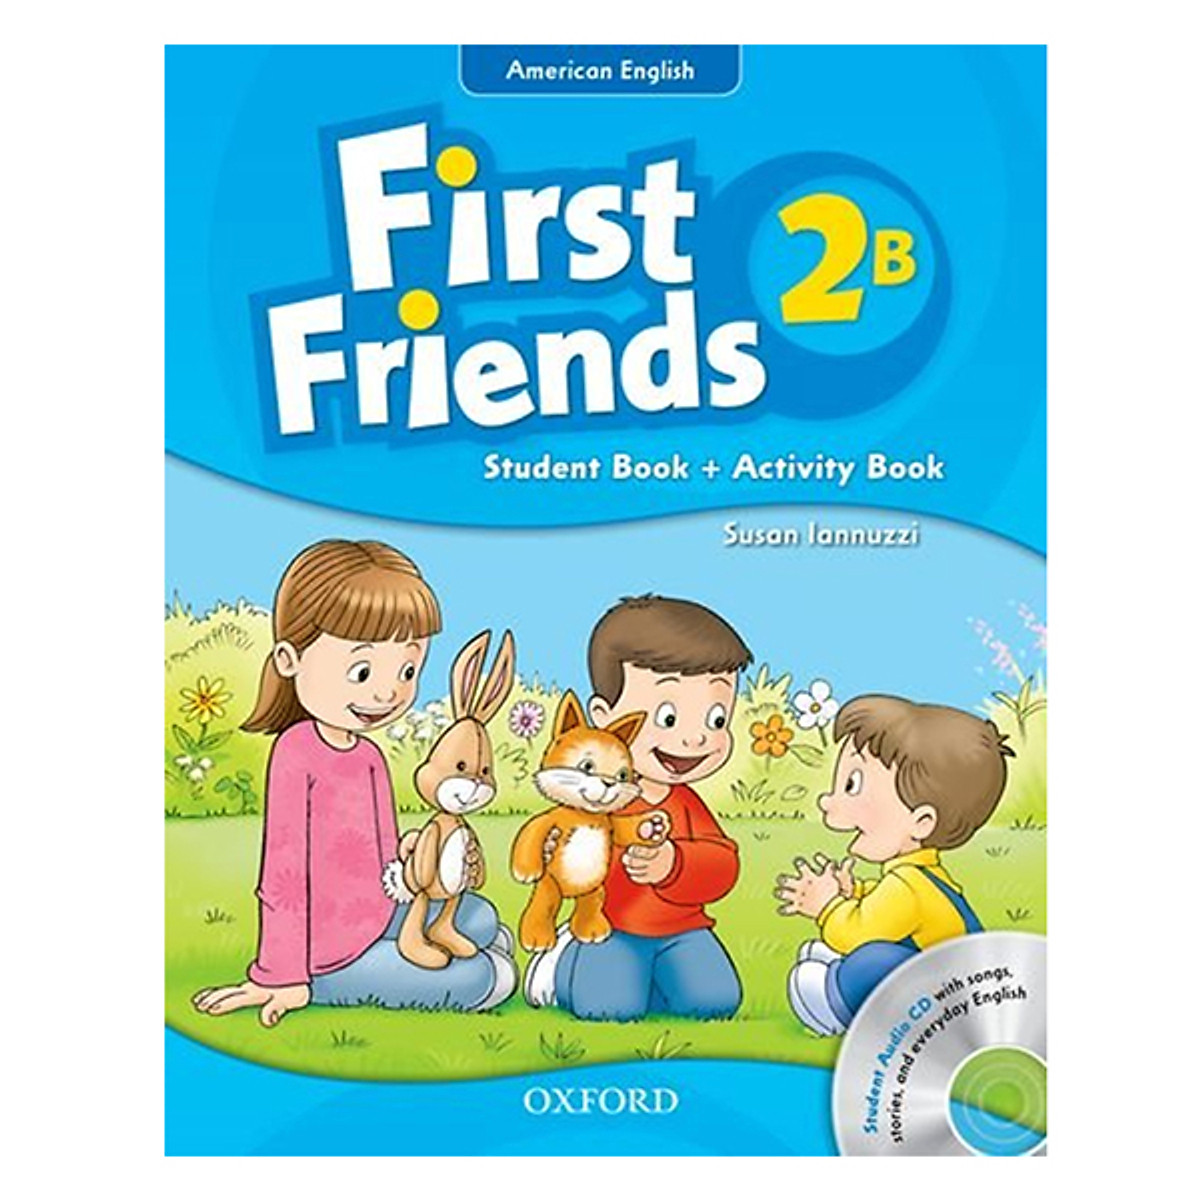 [Hàng thanh lý miễn đổi trả] First Friends 2B Student Book + Activity Book (Student Audio CD With Songs, Stories and Everyday English) (American English Edition)